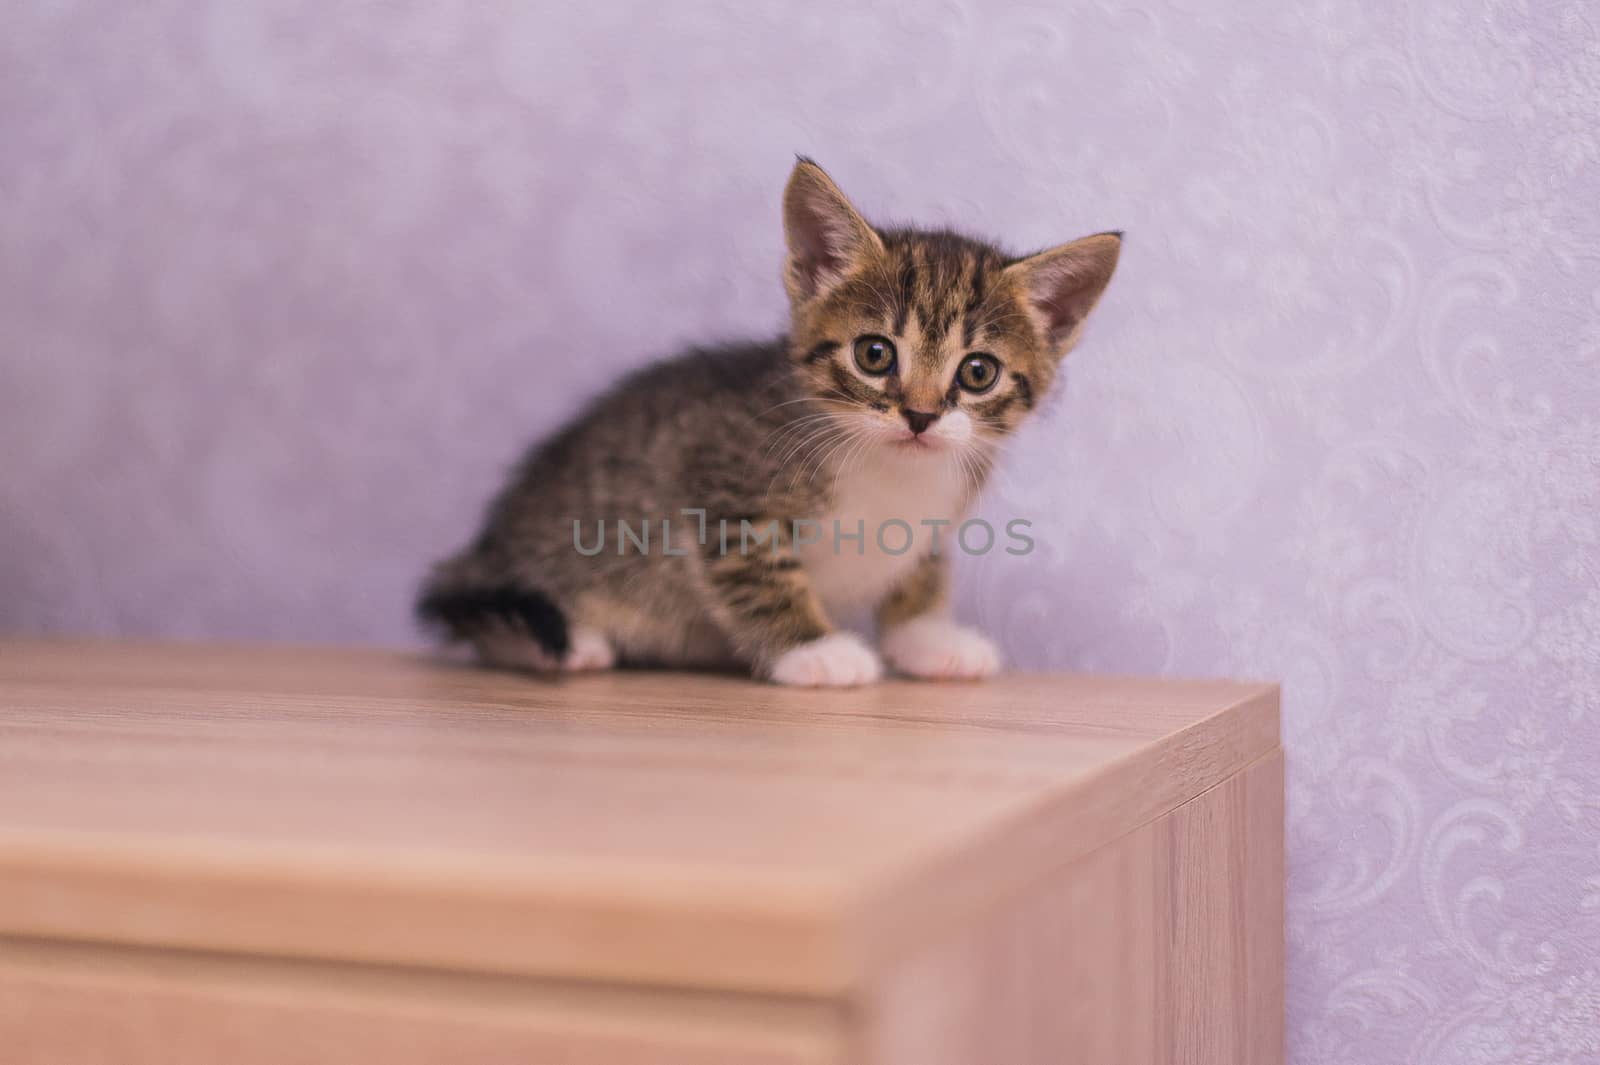 little striped kitten sits on a wooden table on a purple background by chernobrovin